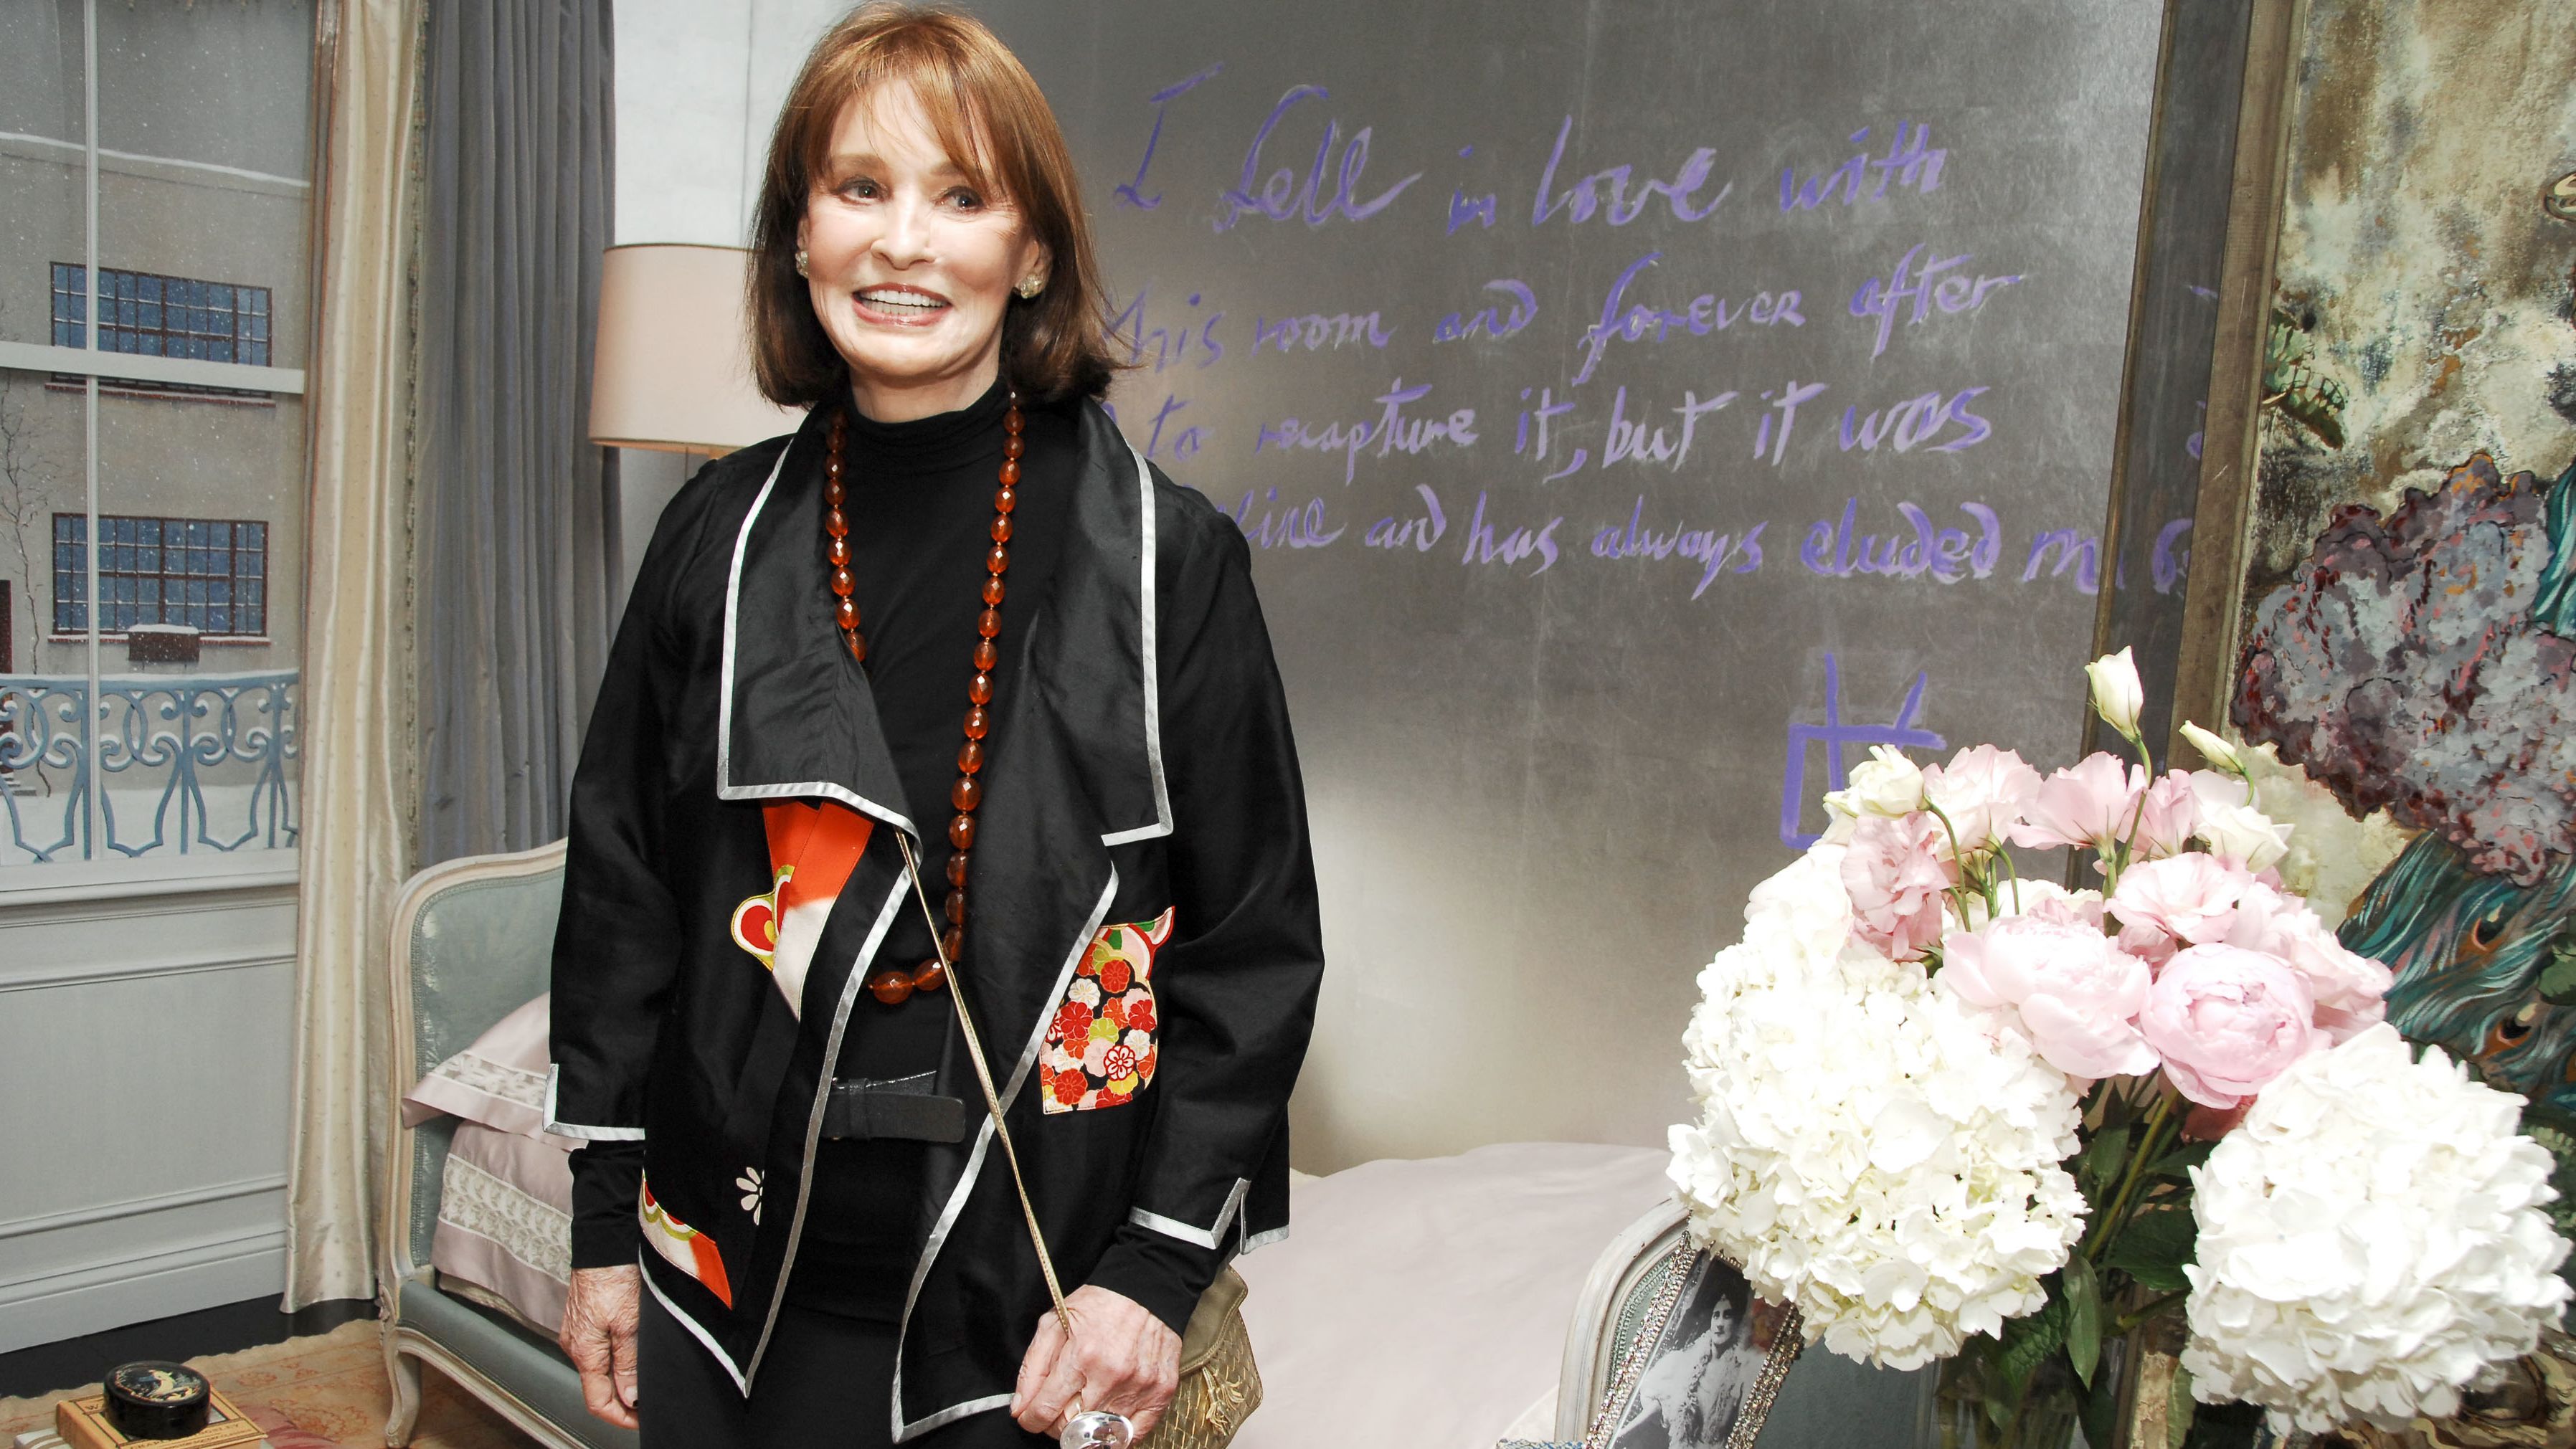 Vanderbilt attends an event for the Kips Bay Boys & Girls Club in New York in 2009. Vanderbilt delved back into her love for art and writing after the Jones Apparel Group bought the Gloria Vanderbilt Apparel Corp. for $138 million in 2002.